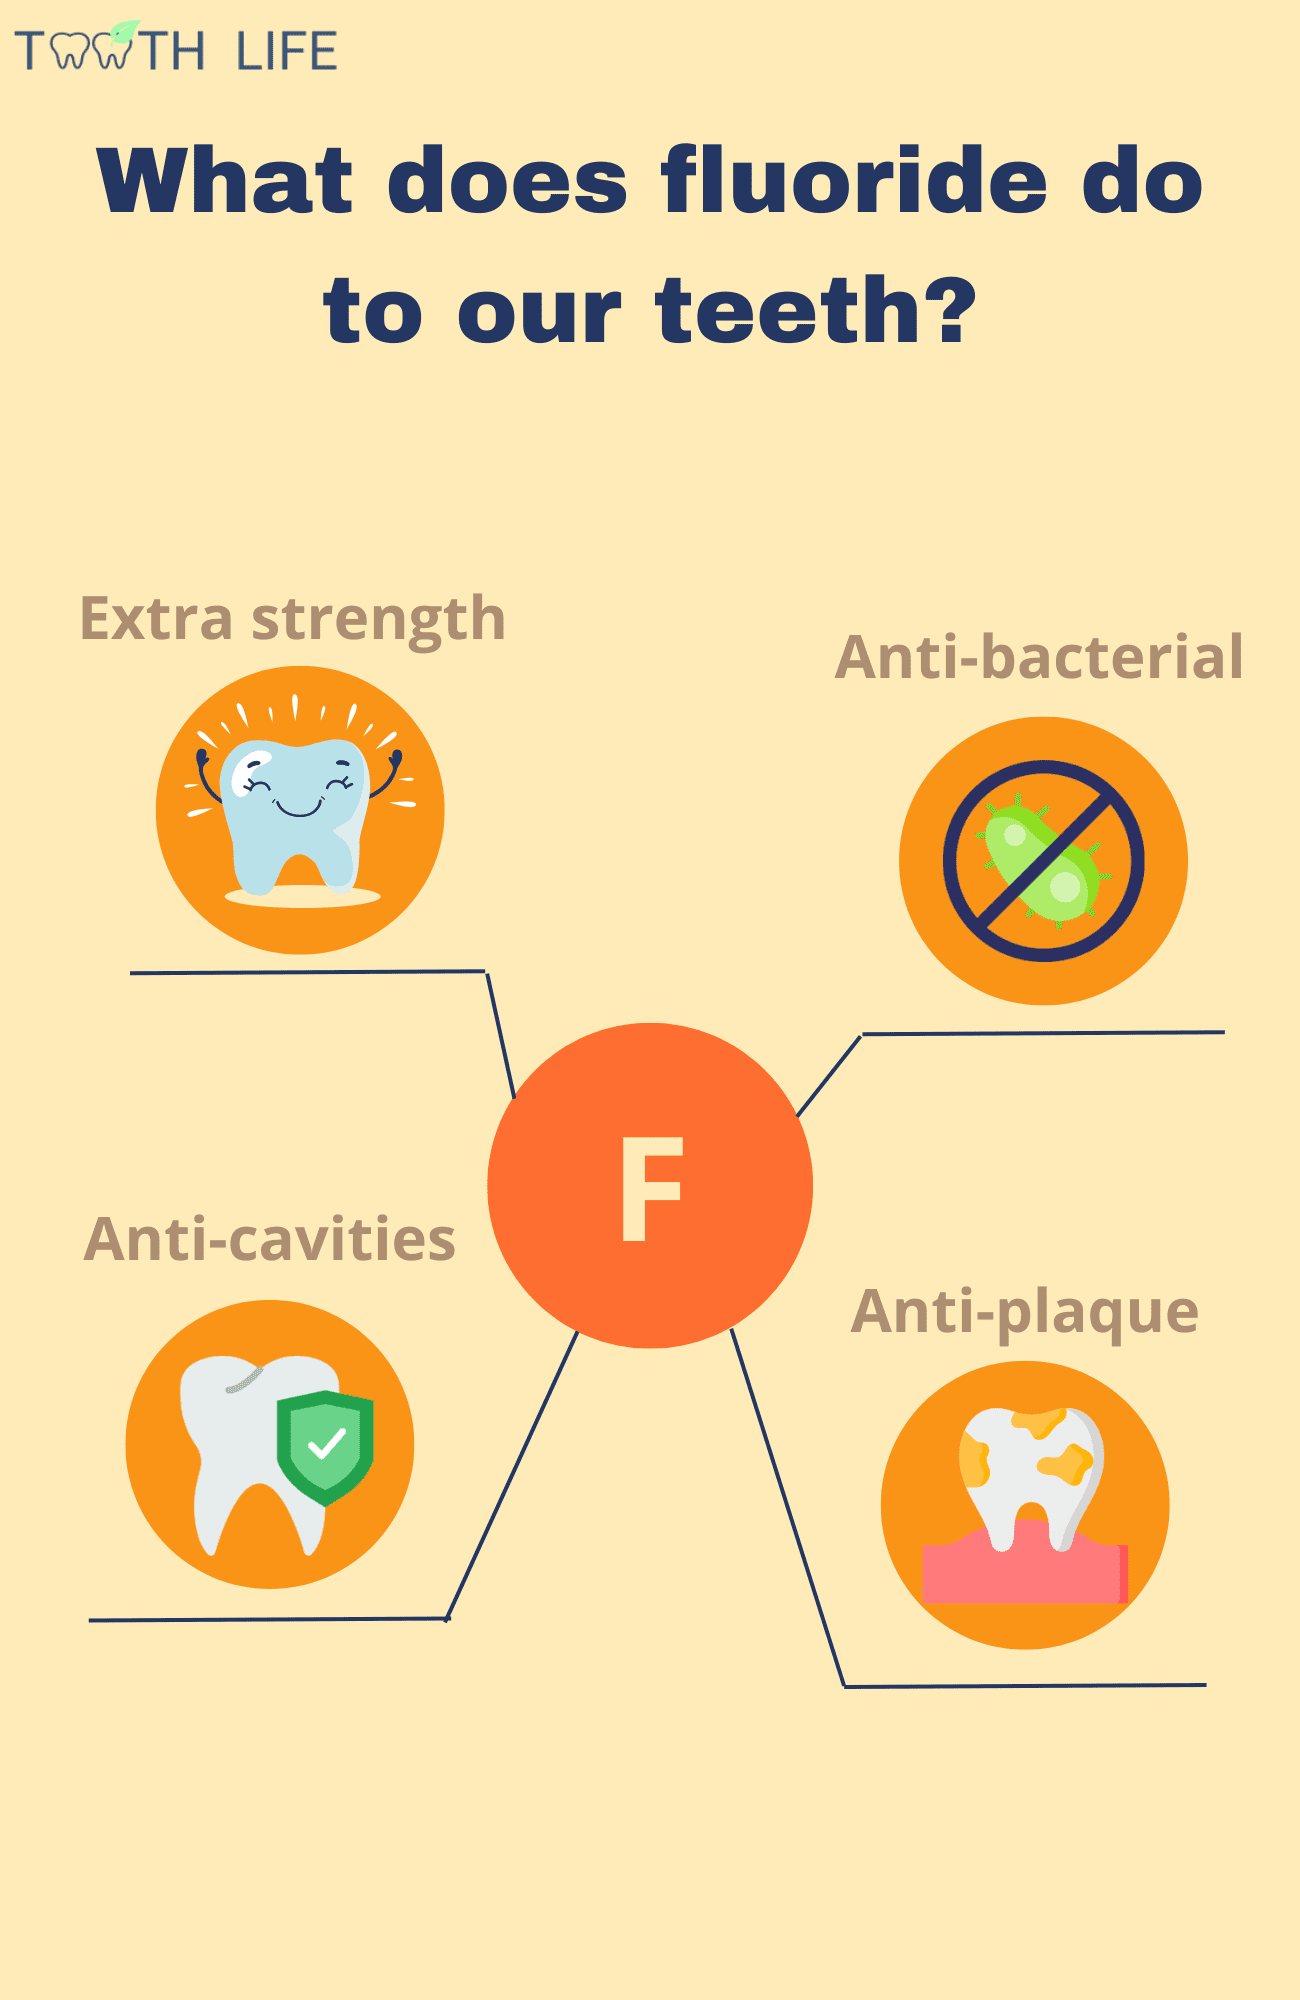 fluoride effects on our teeth